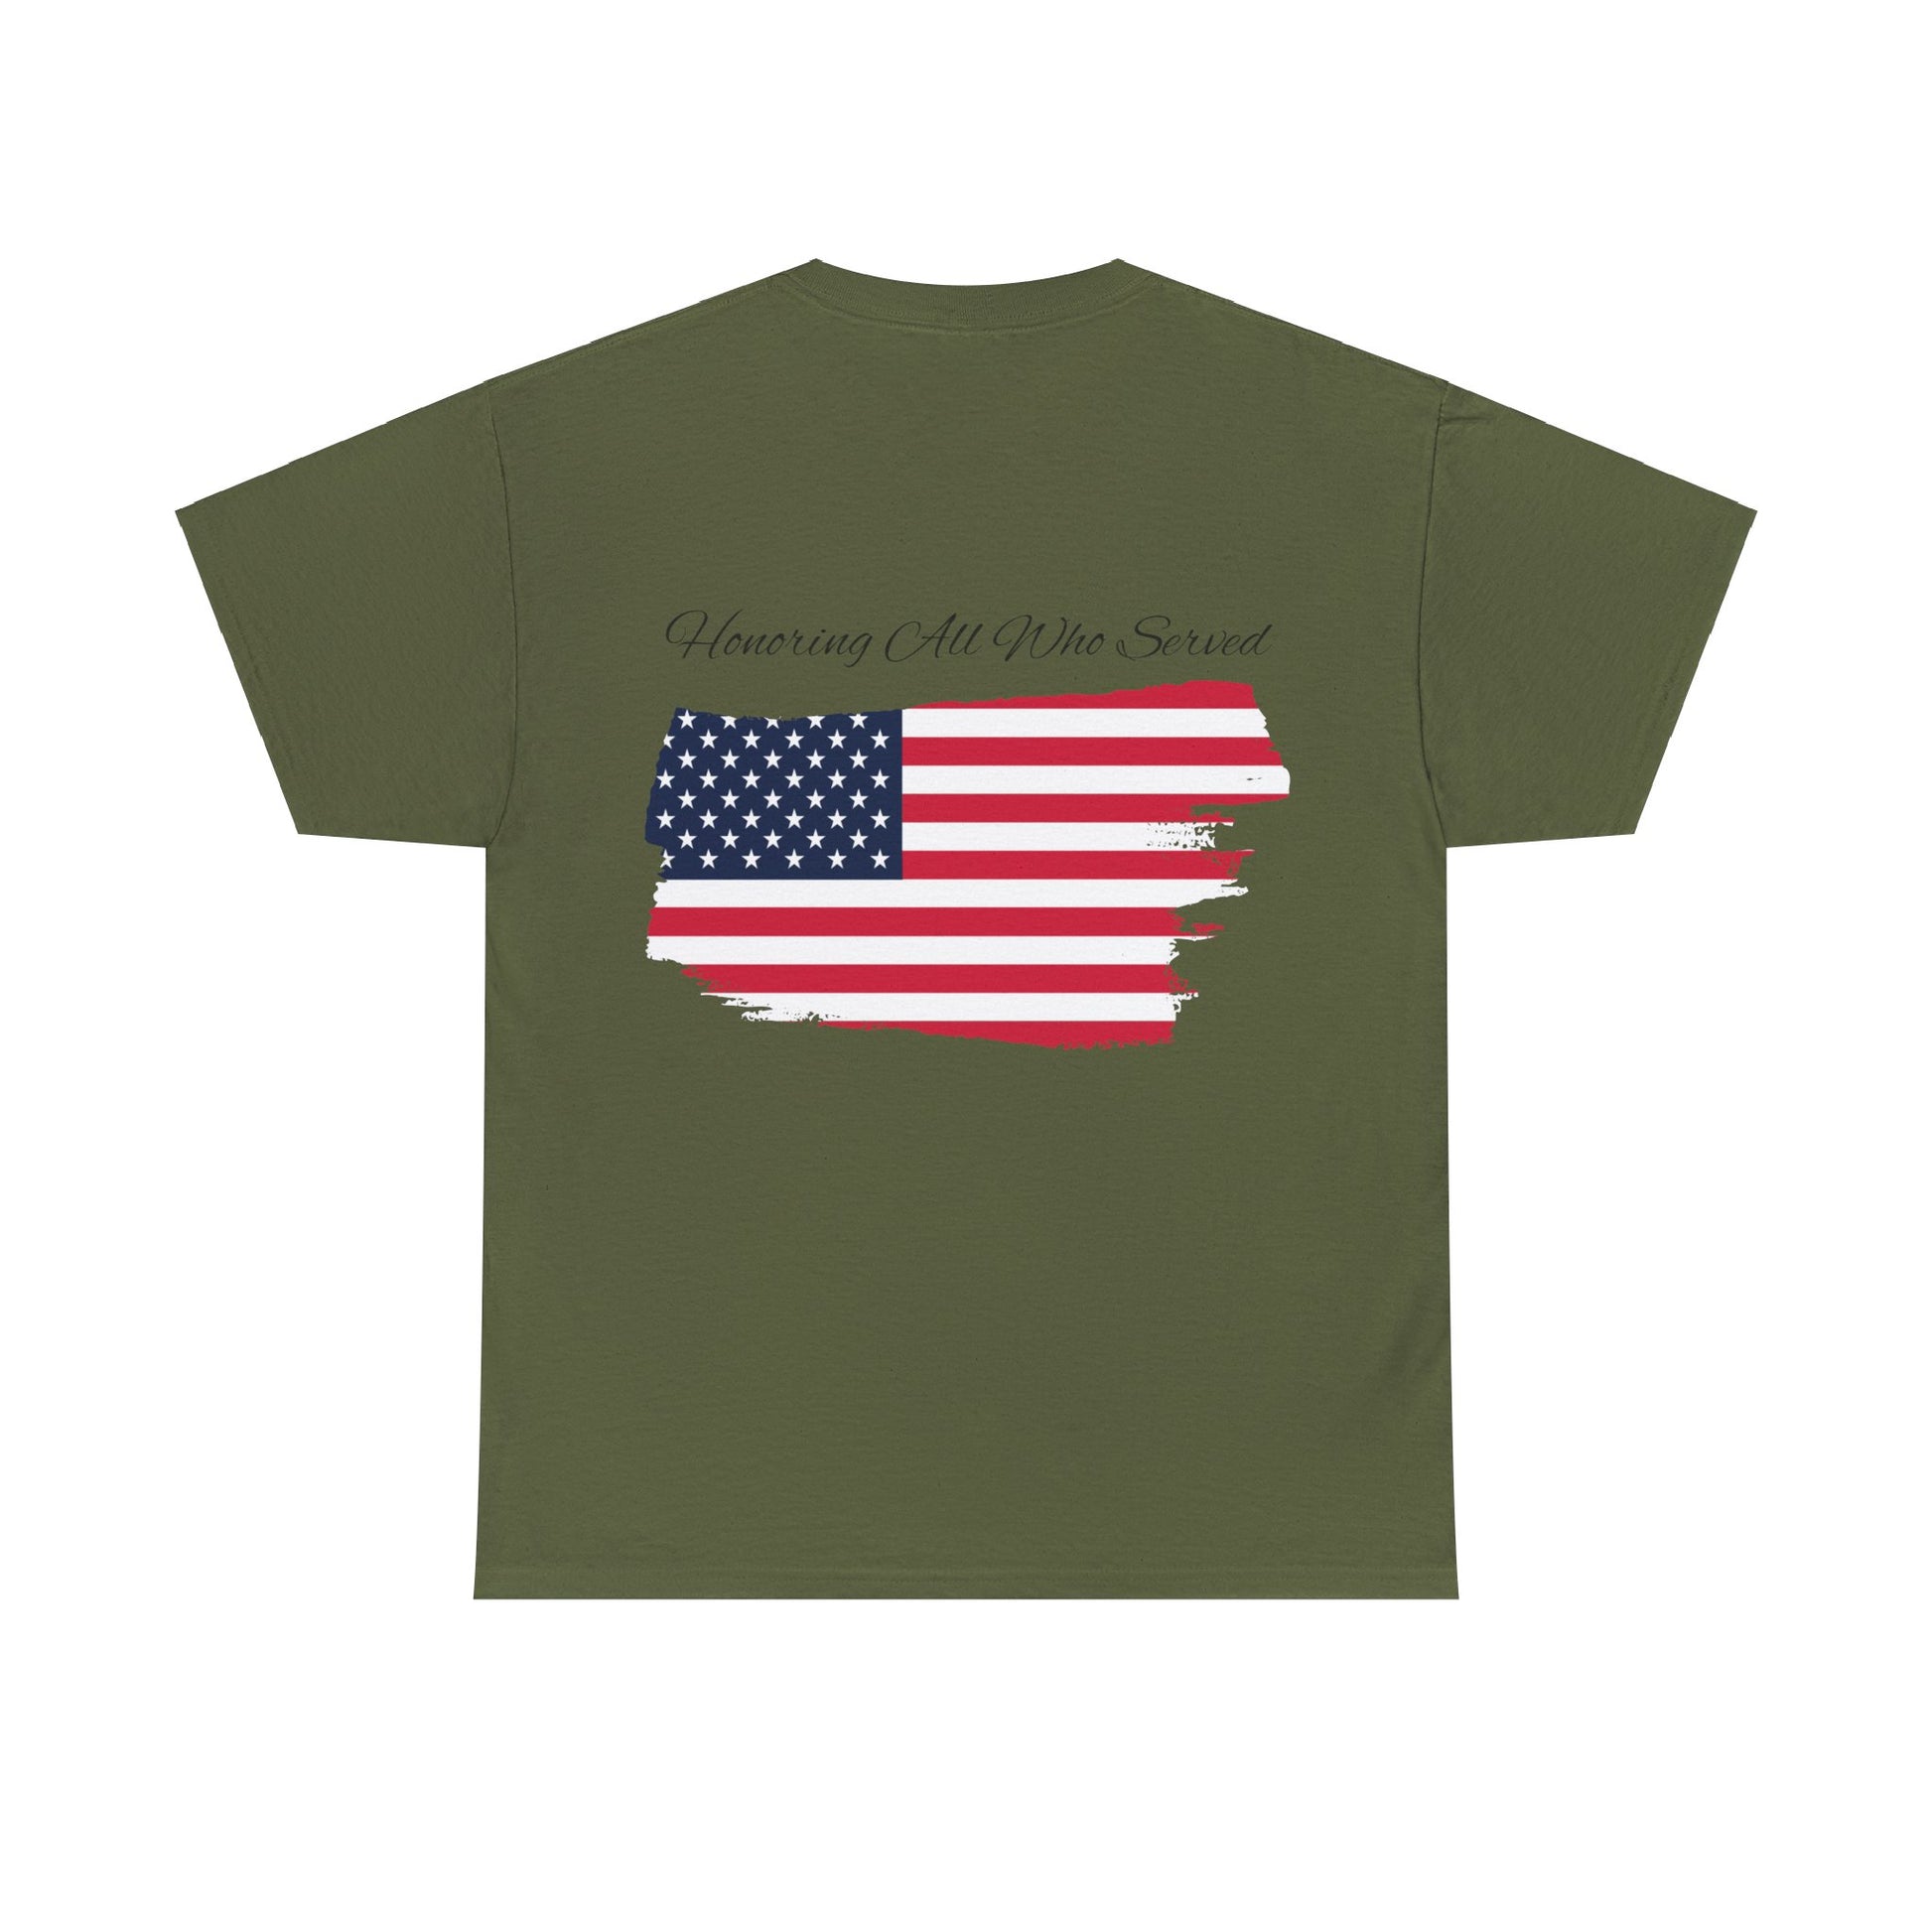 Unisex cotton tee with 'Honoring All Who Served' print for veterans tribute11